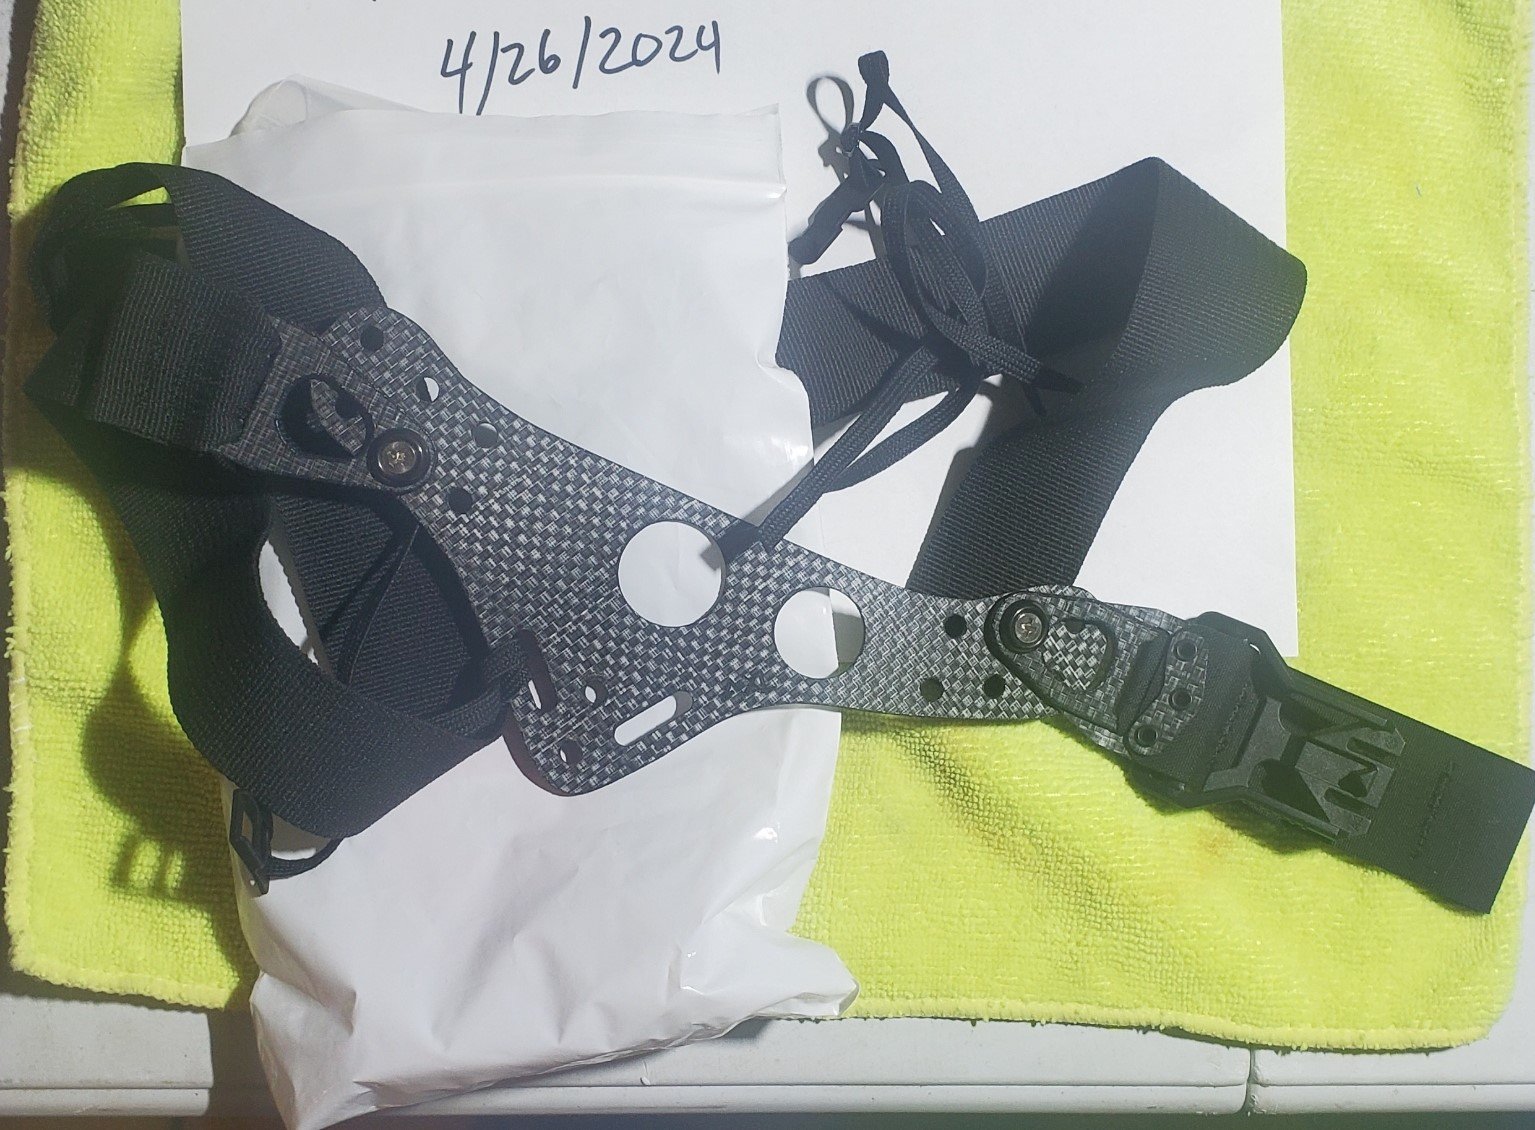 WTS: PHlster Enigma AXL Non light bearing